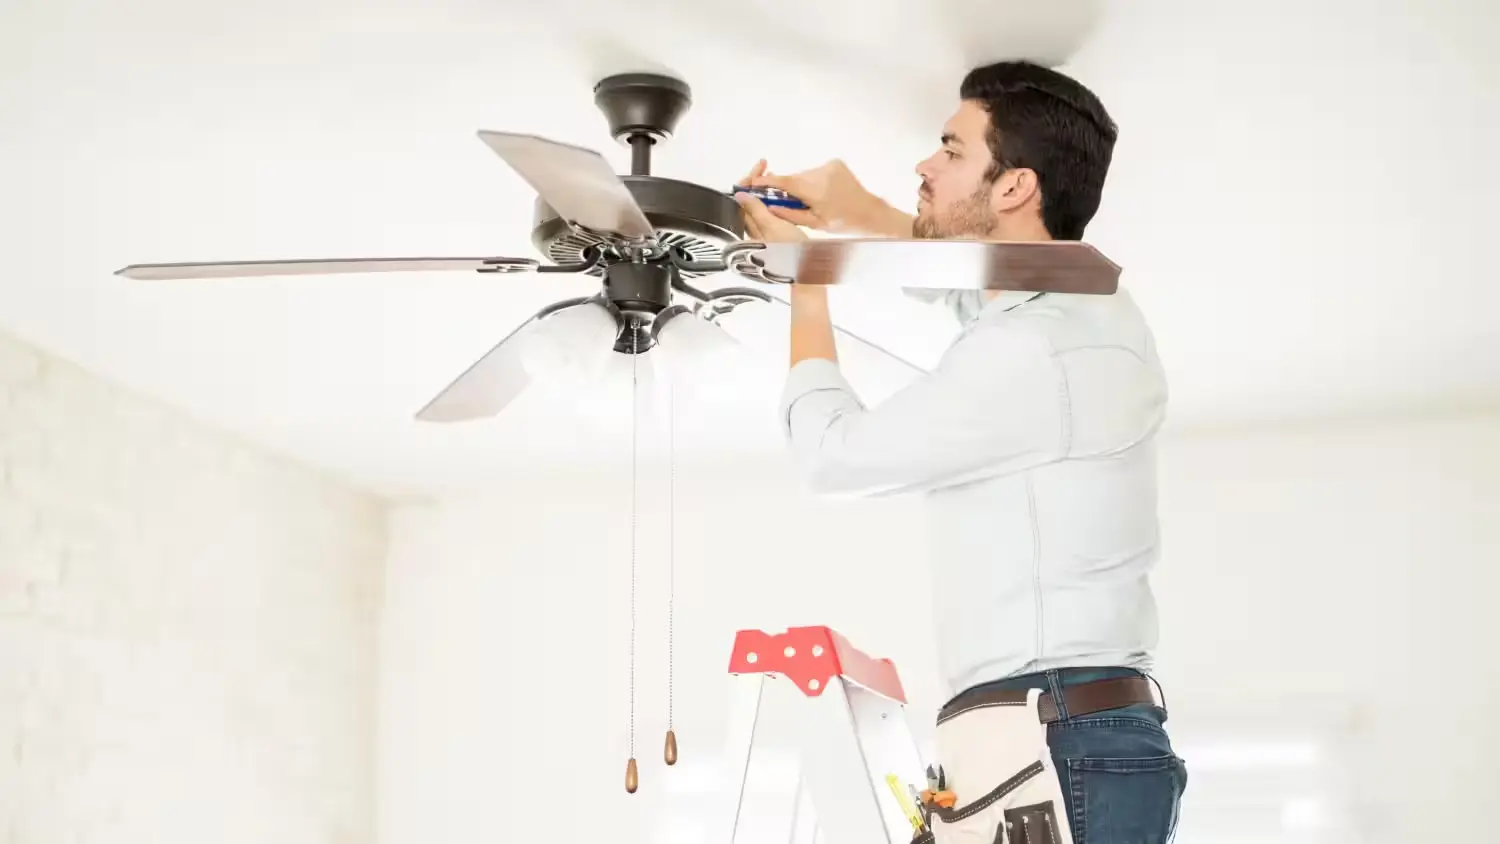 Benefits of Hiring an Electrician to Install Ceiling Fans